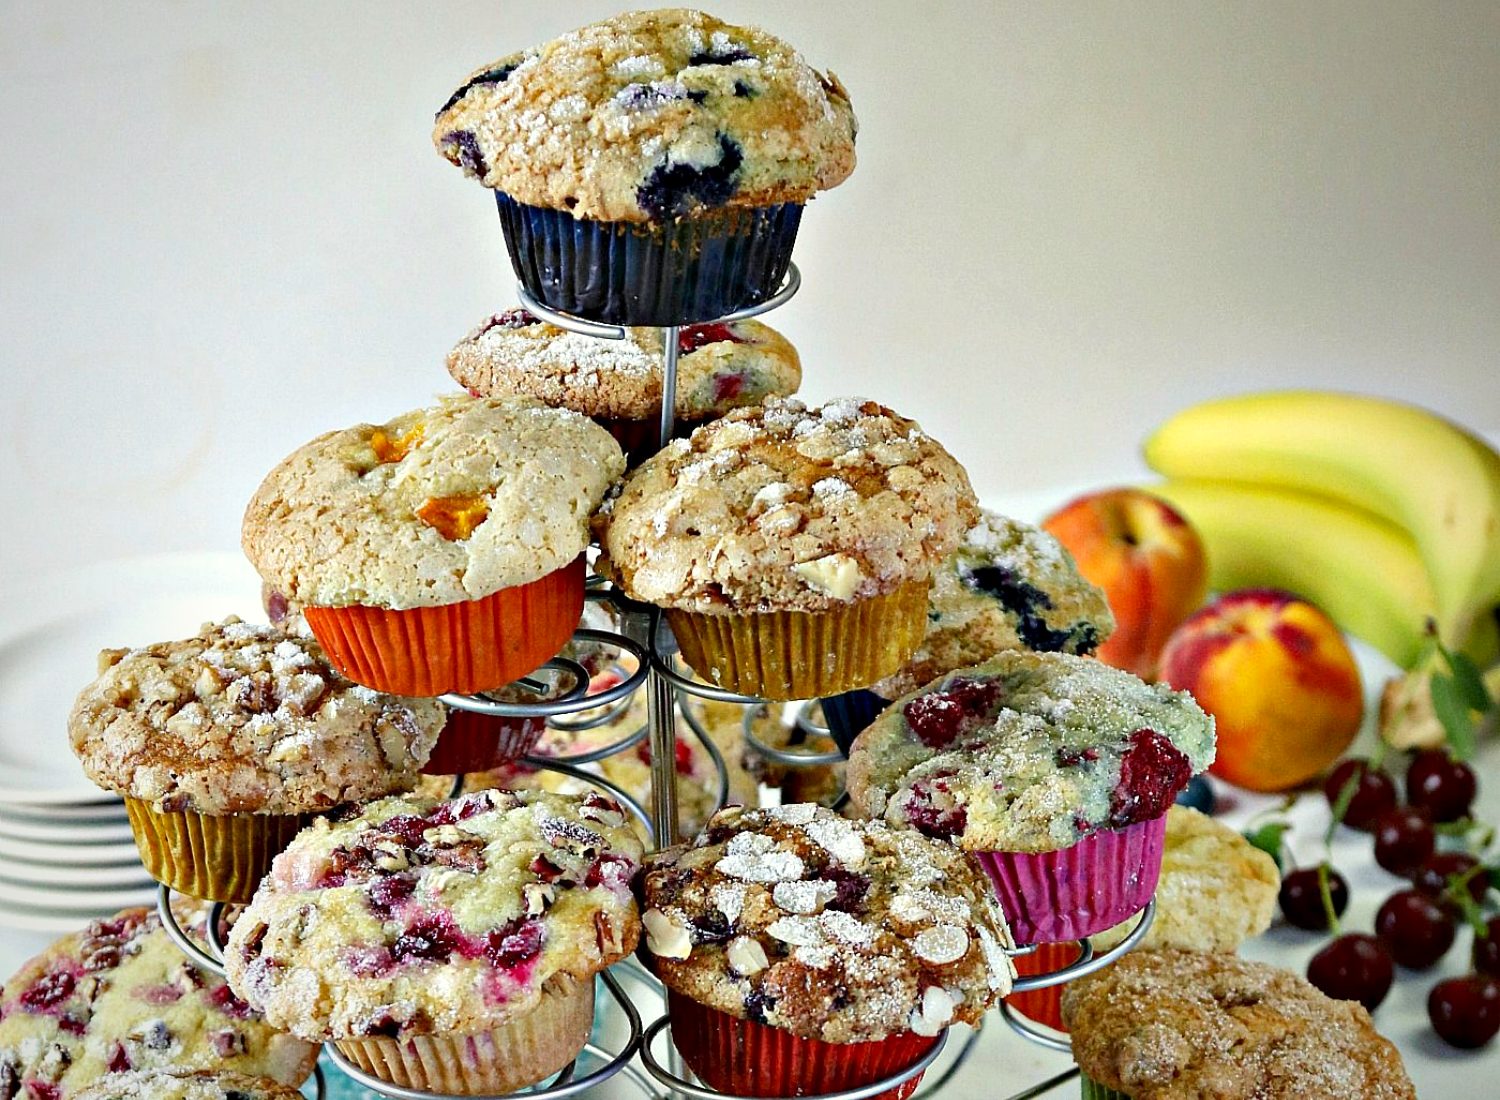 Muffin Recipes you Must Try out at Home